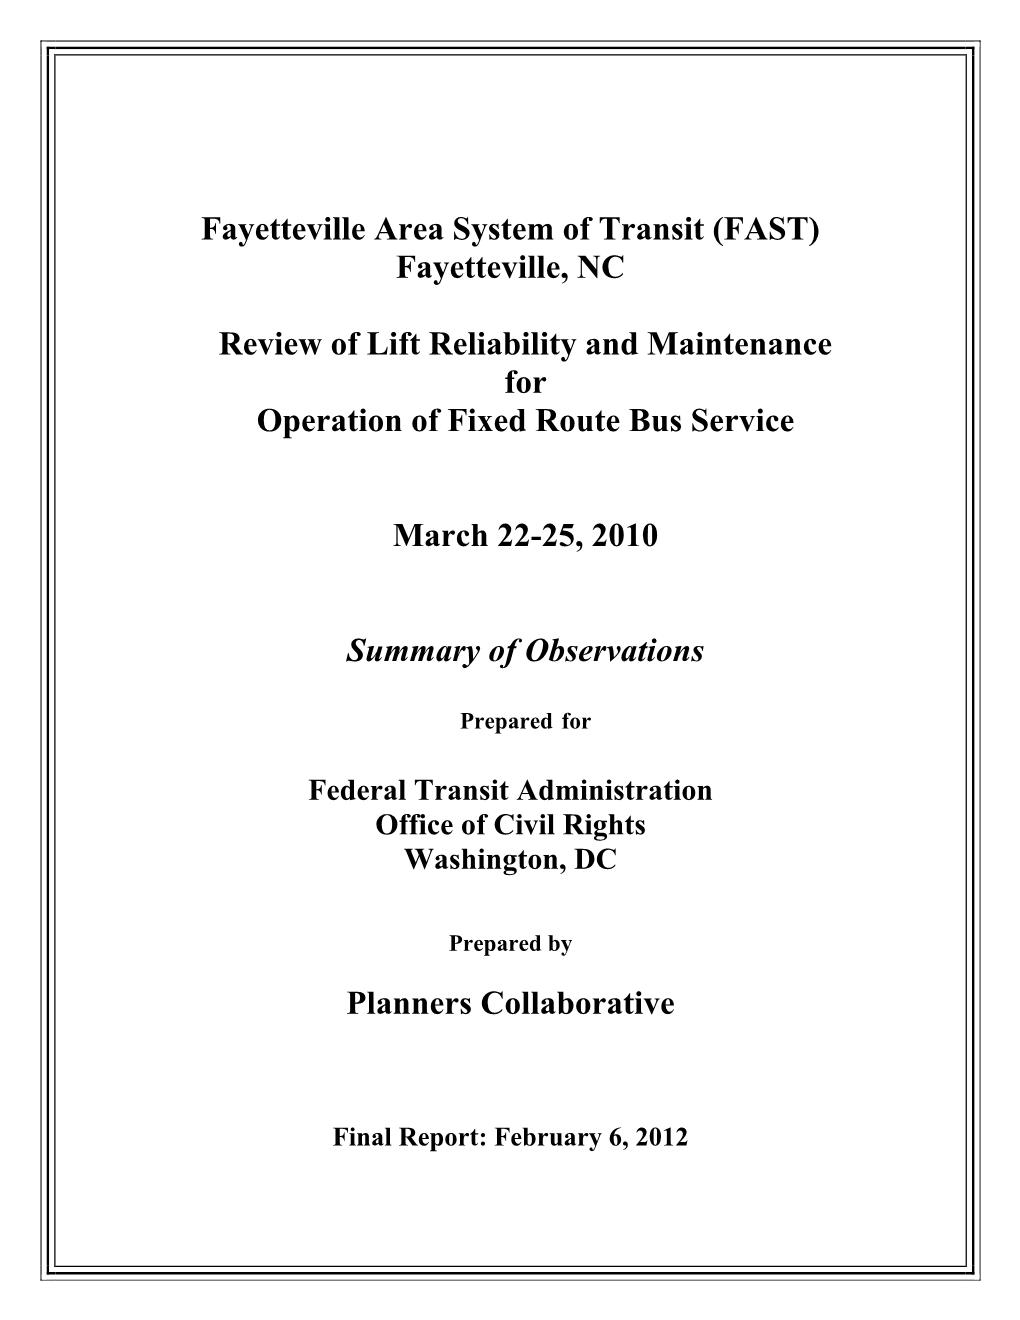 Fayettville Area System of Transit Review of Lift Reliability and Maintenance for Operation of Fixed Route Bus Service